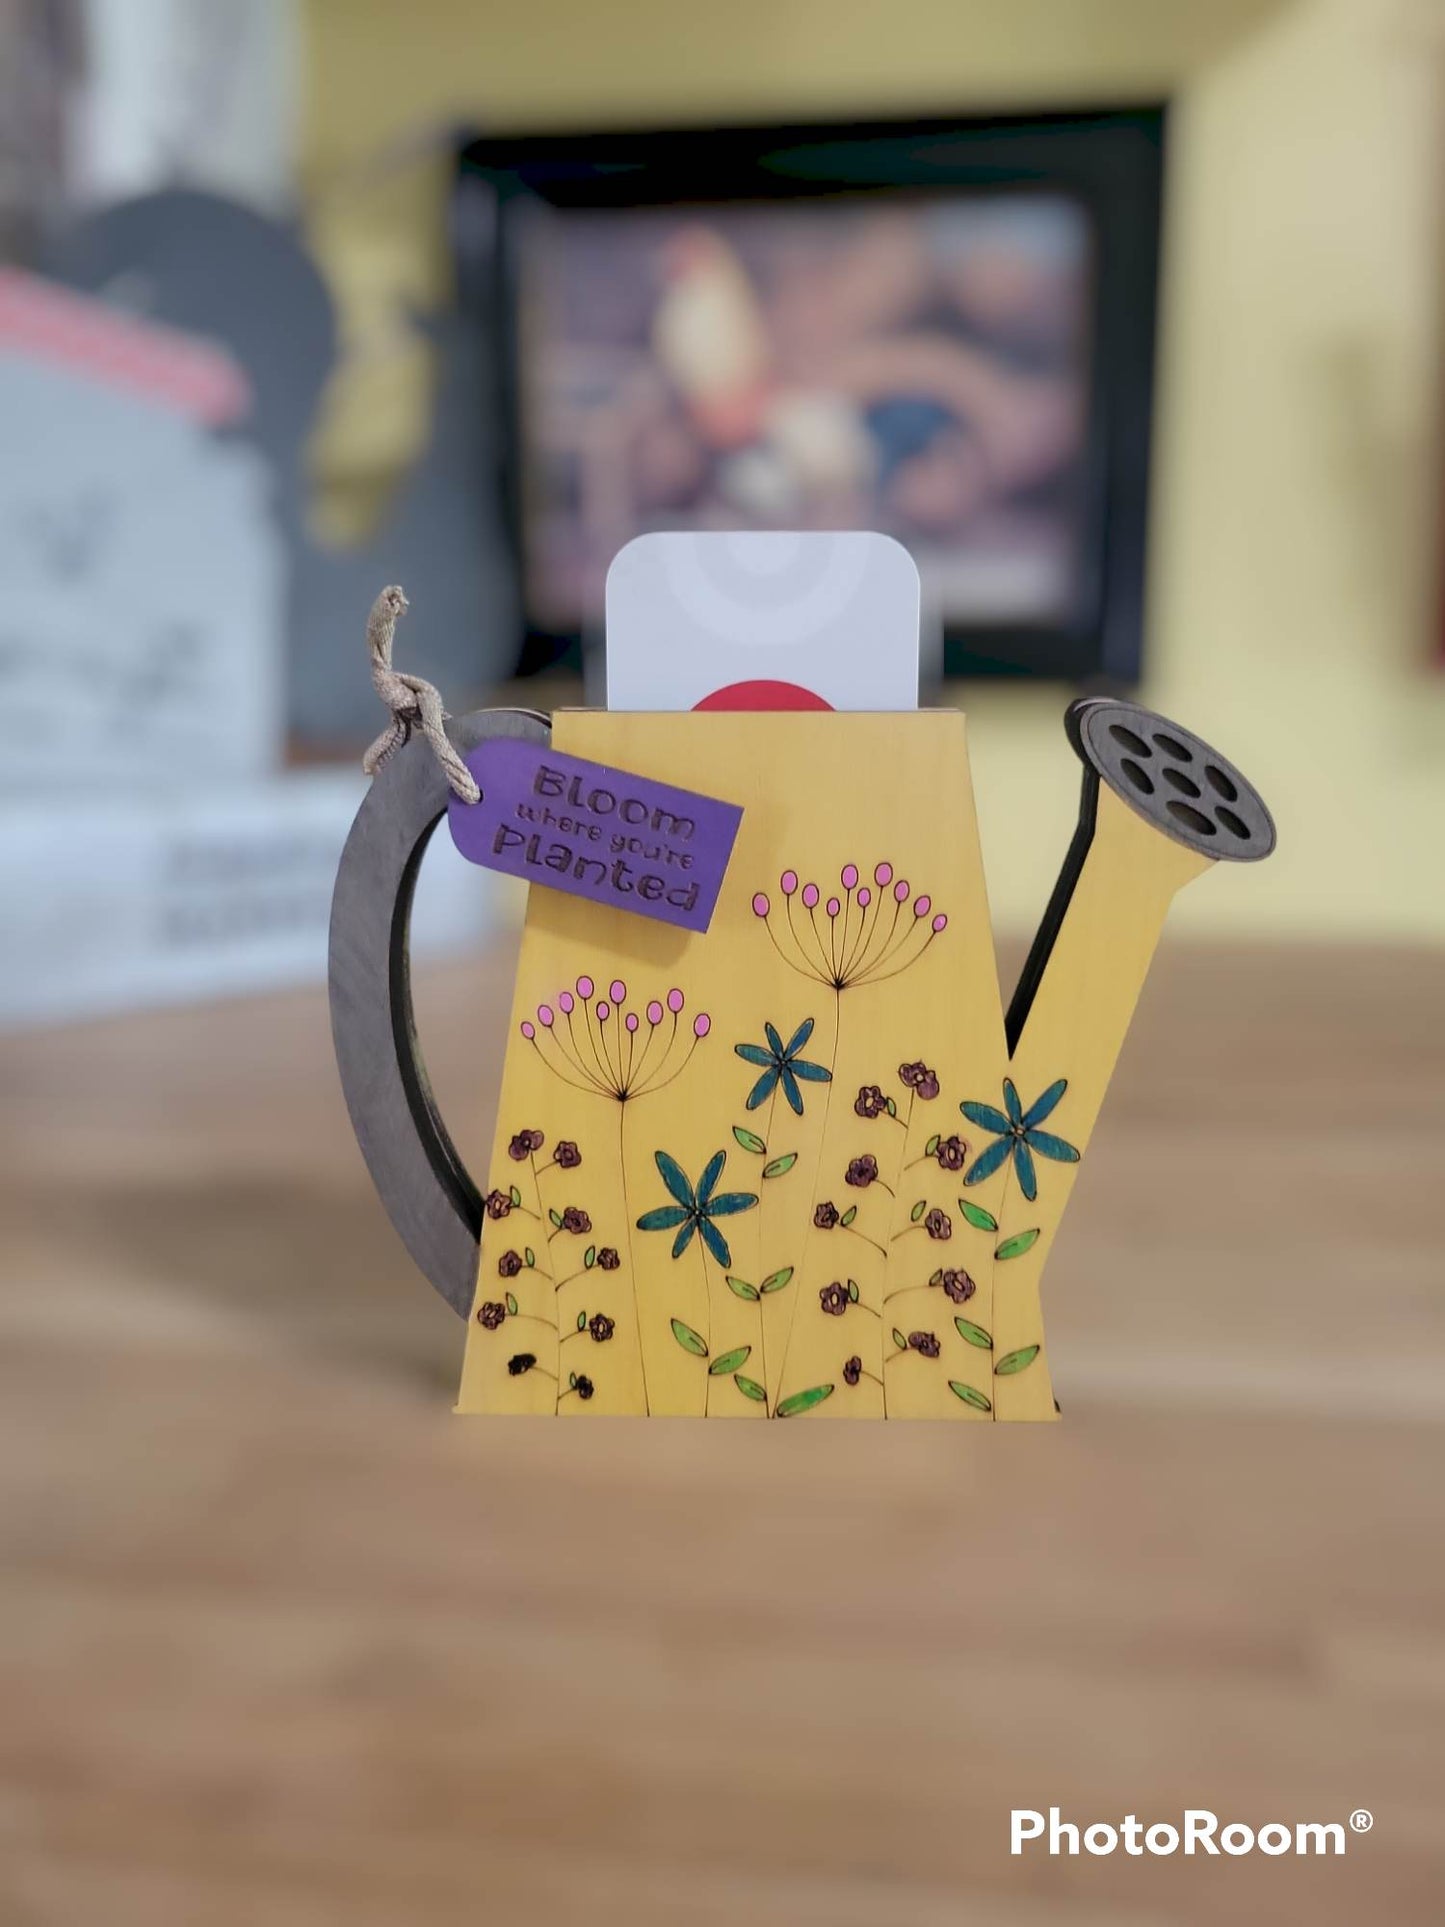 Completed painted wildflower watering can DIY kit with gift card